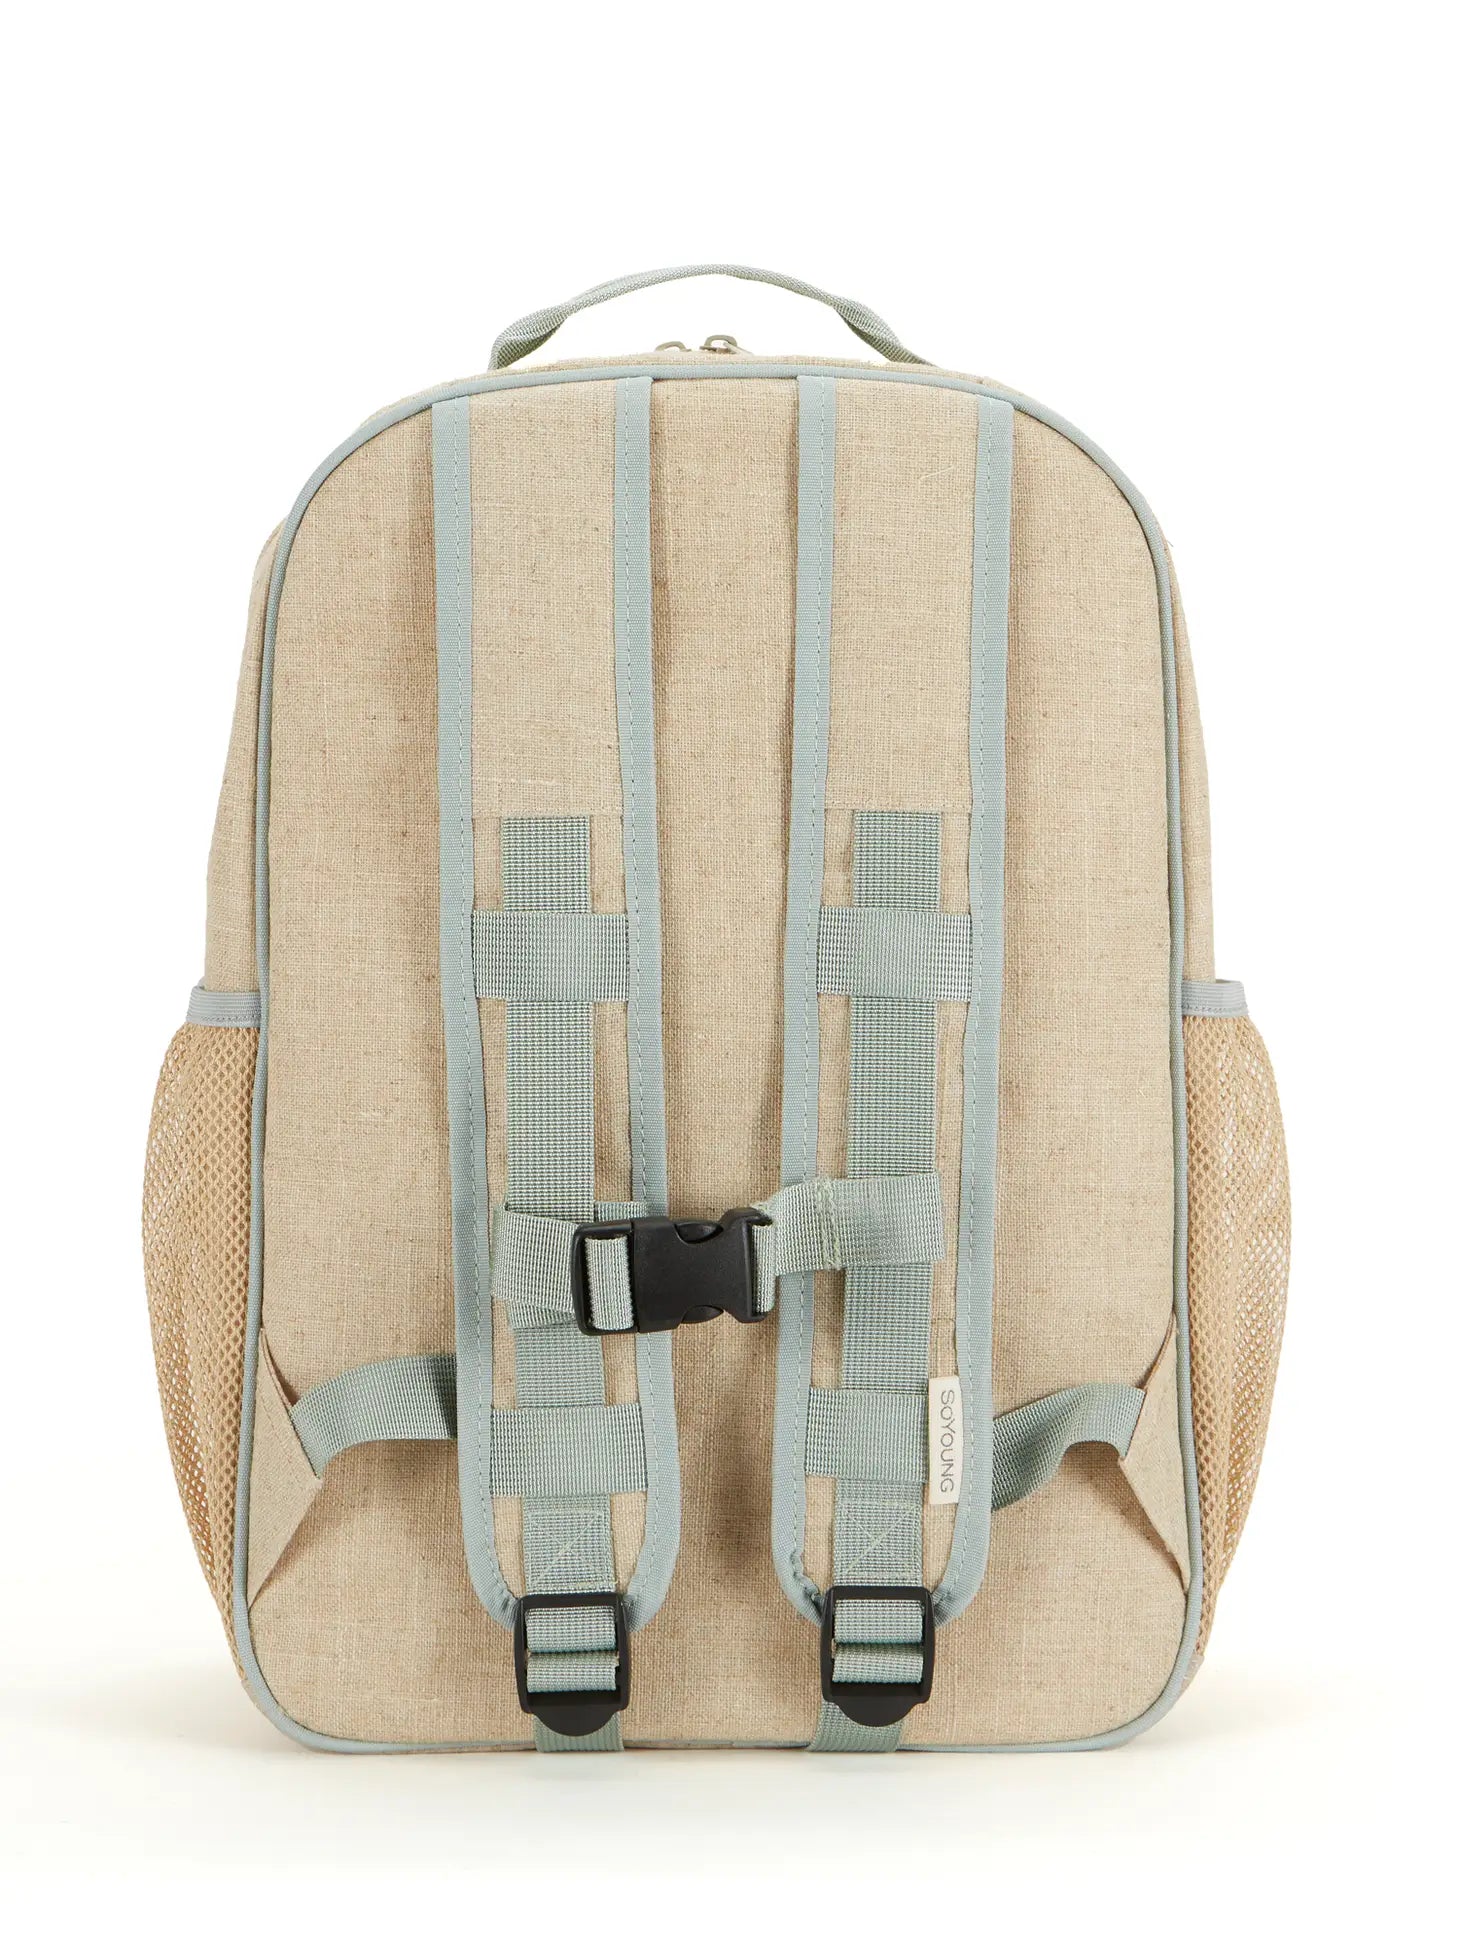 SoYoung Grade School Backpack - Forest Friends